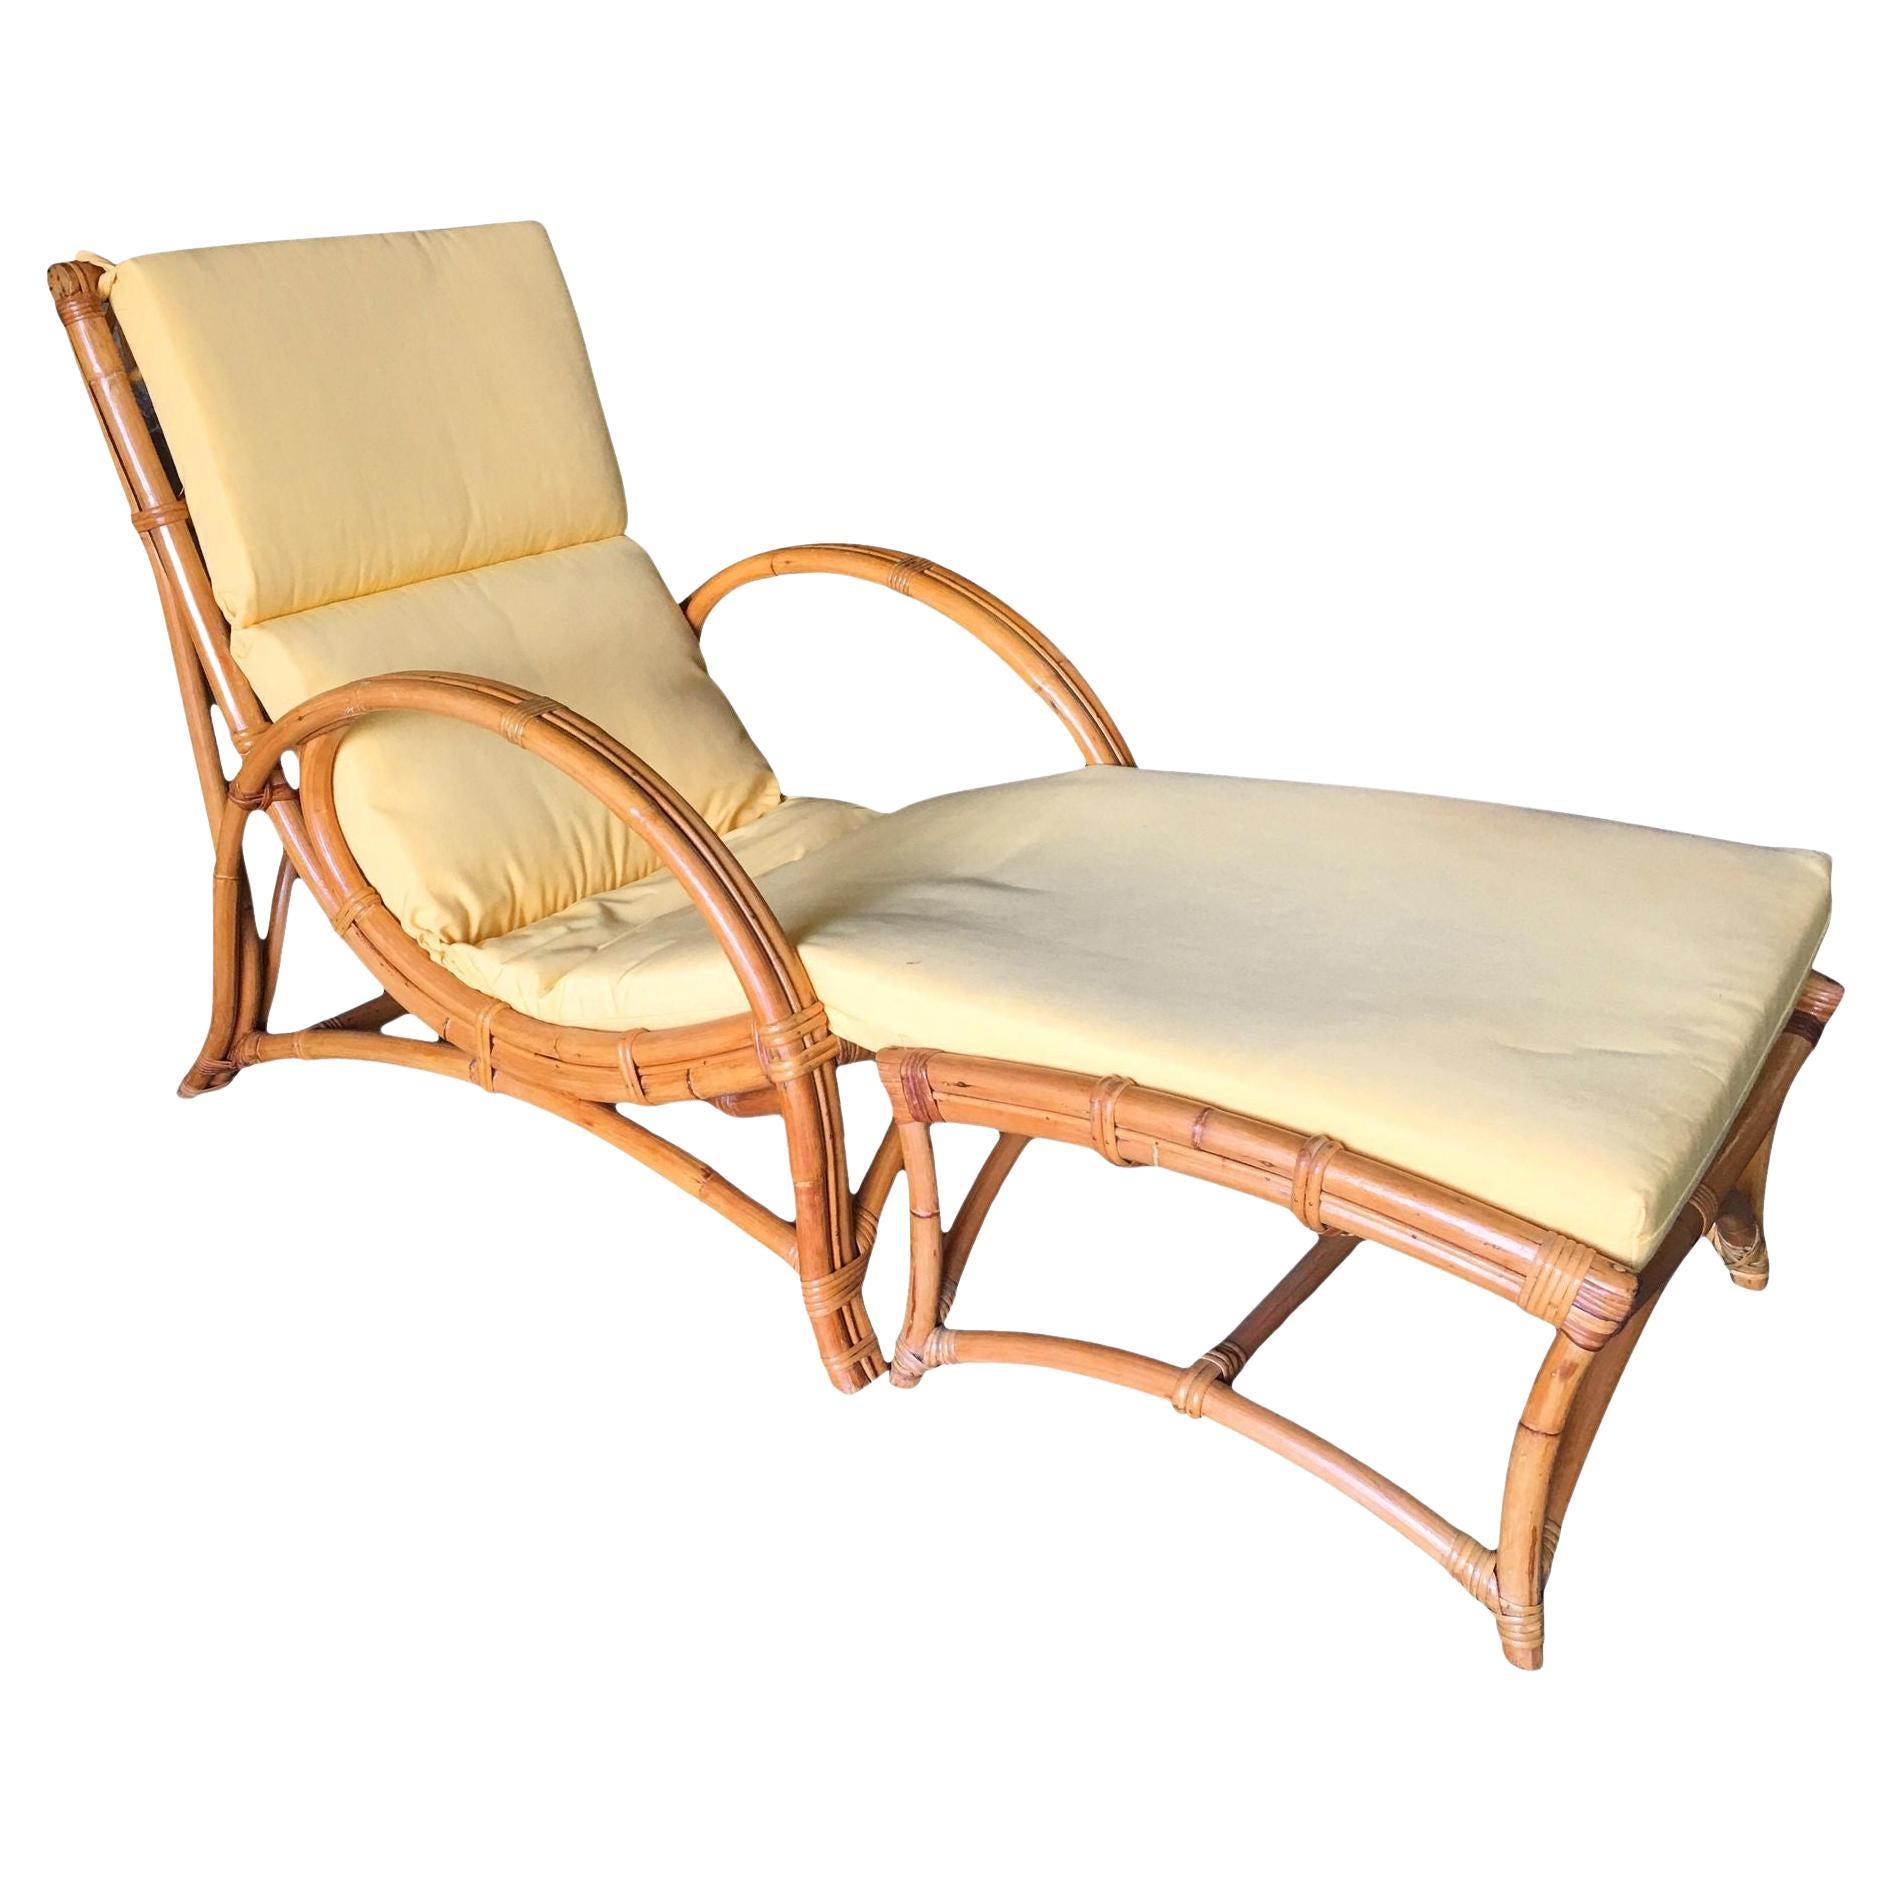 Restored Two-Strand Slope Seat Rattan Chaise Lounge With Ottoman For Sale